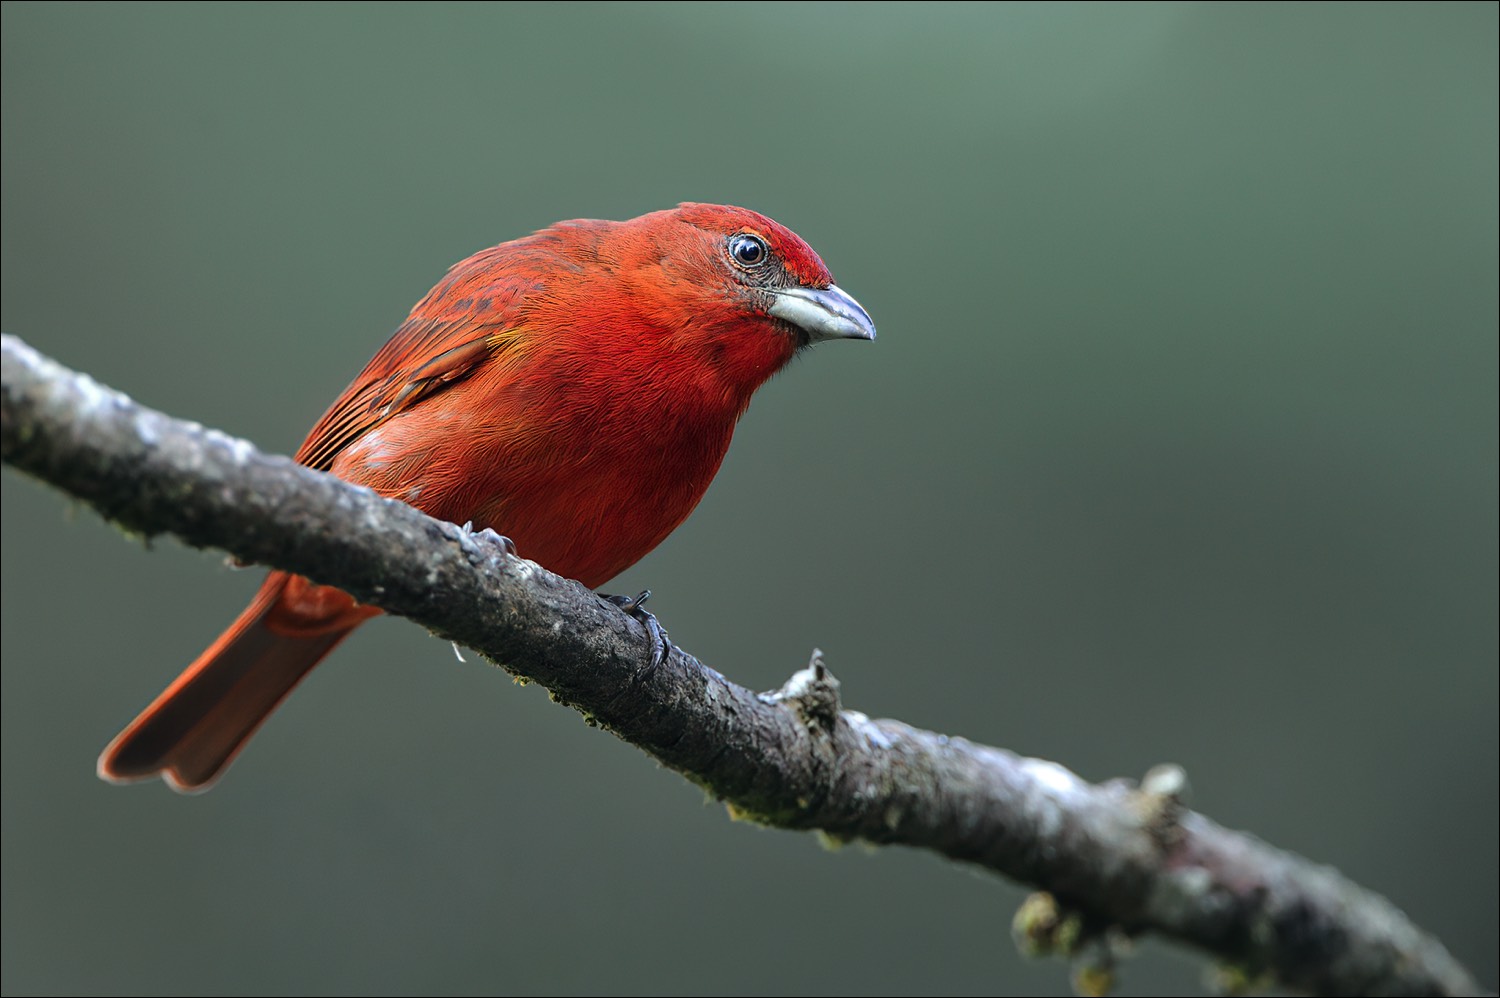 Hepatic Tanager (Levertangare)